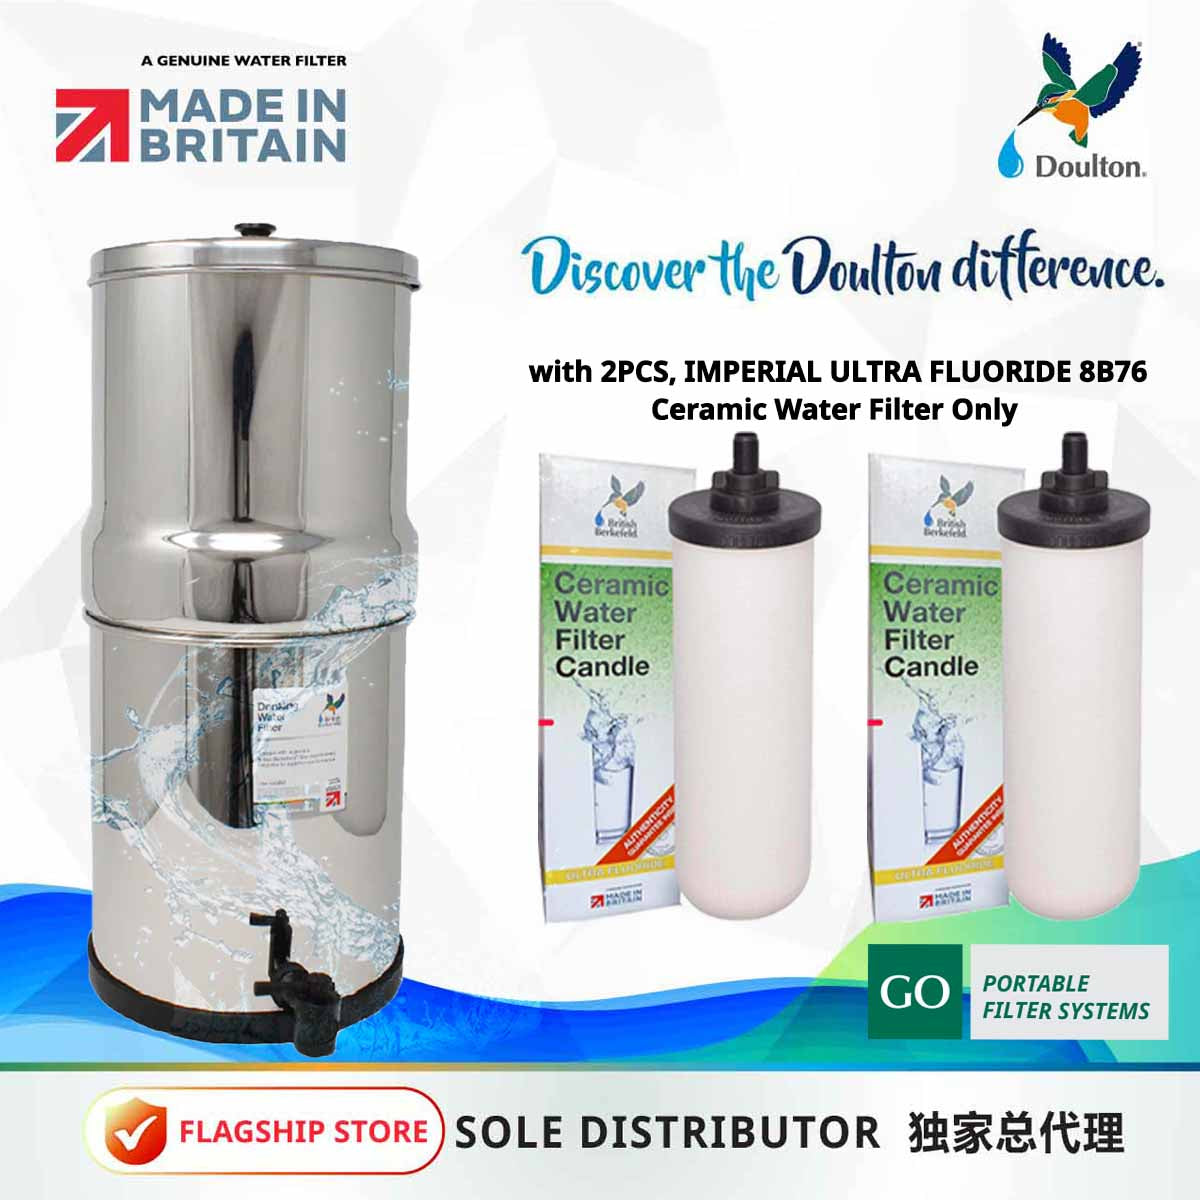 Doulton SUS304 Gravity Fed System *FREE eXtra 2 Filters for 2nd year!